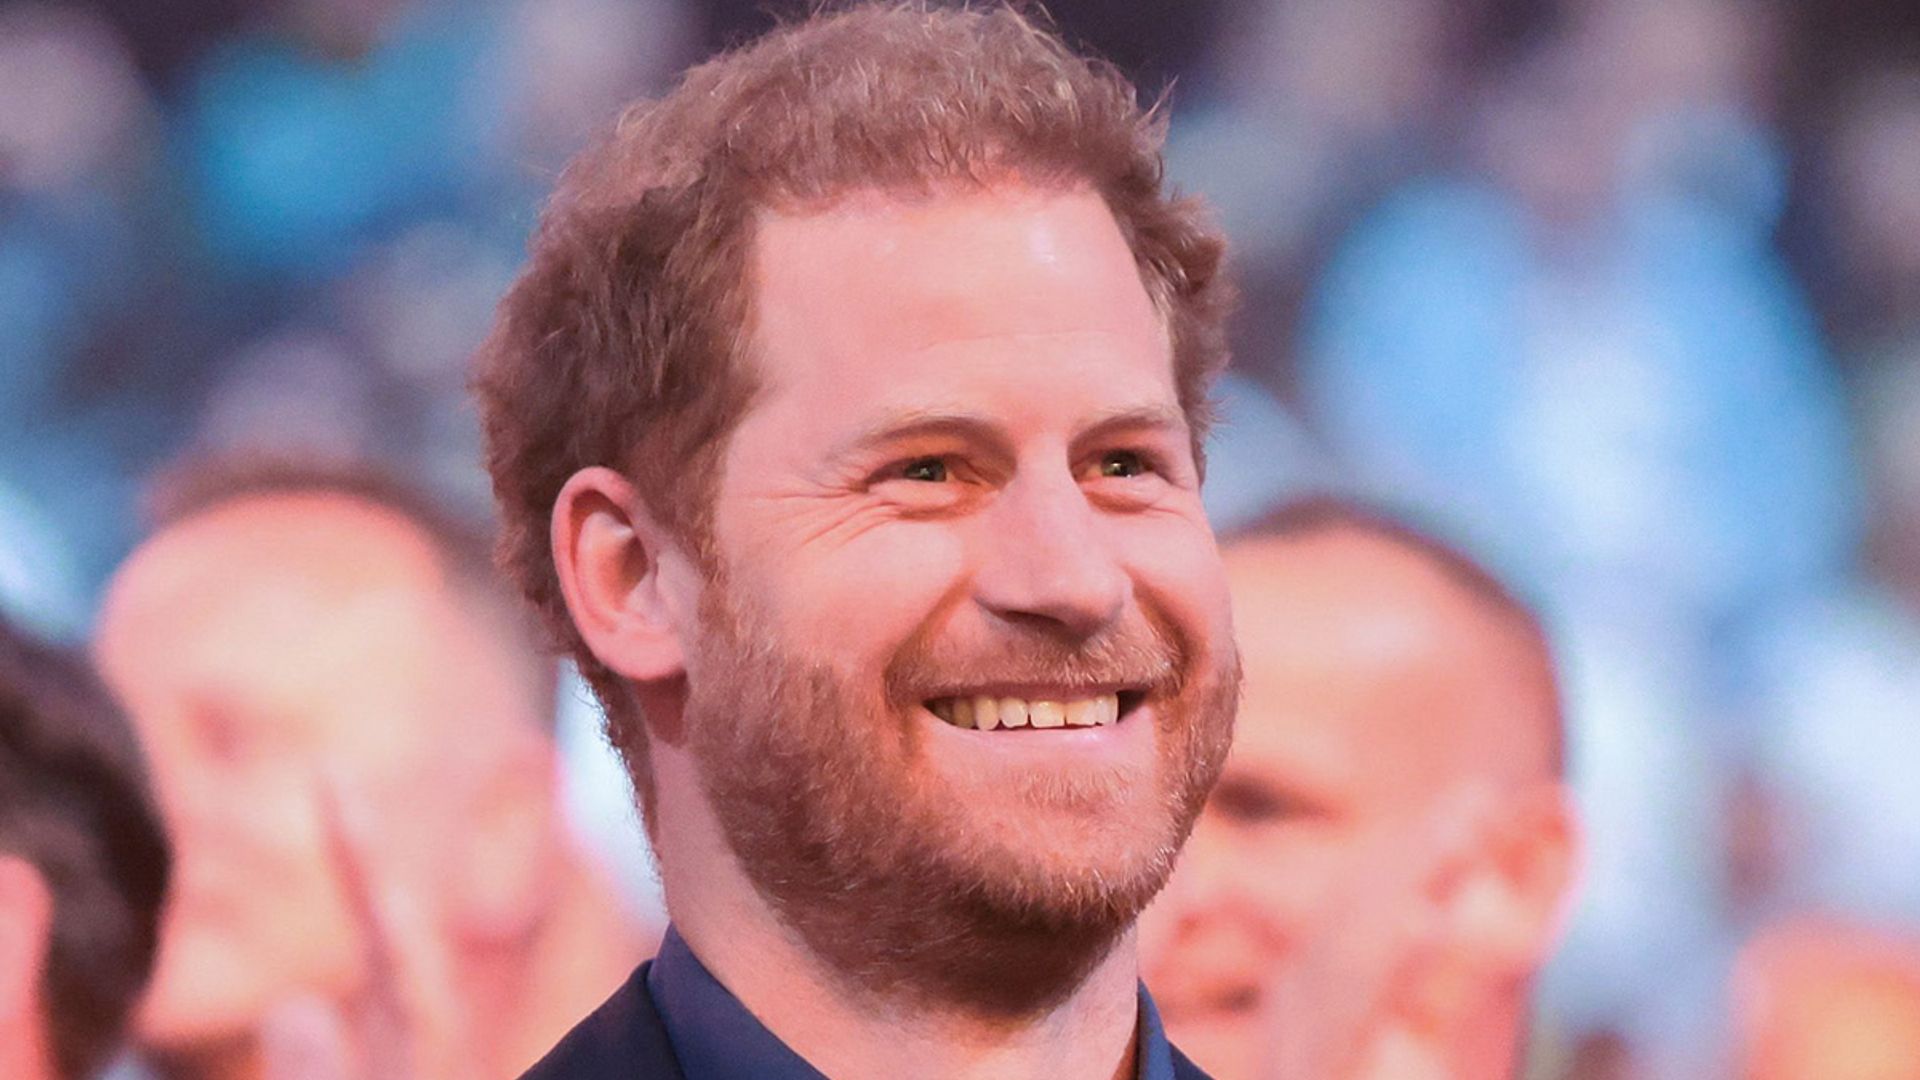 Prince Harry pays tribute to baby daughter Lili in rare public move